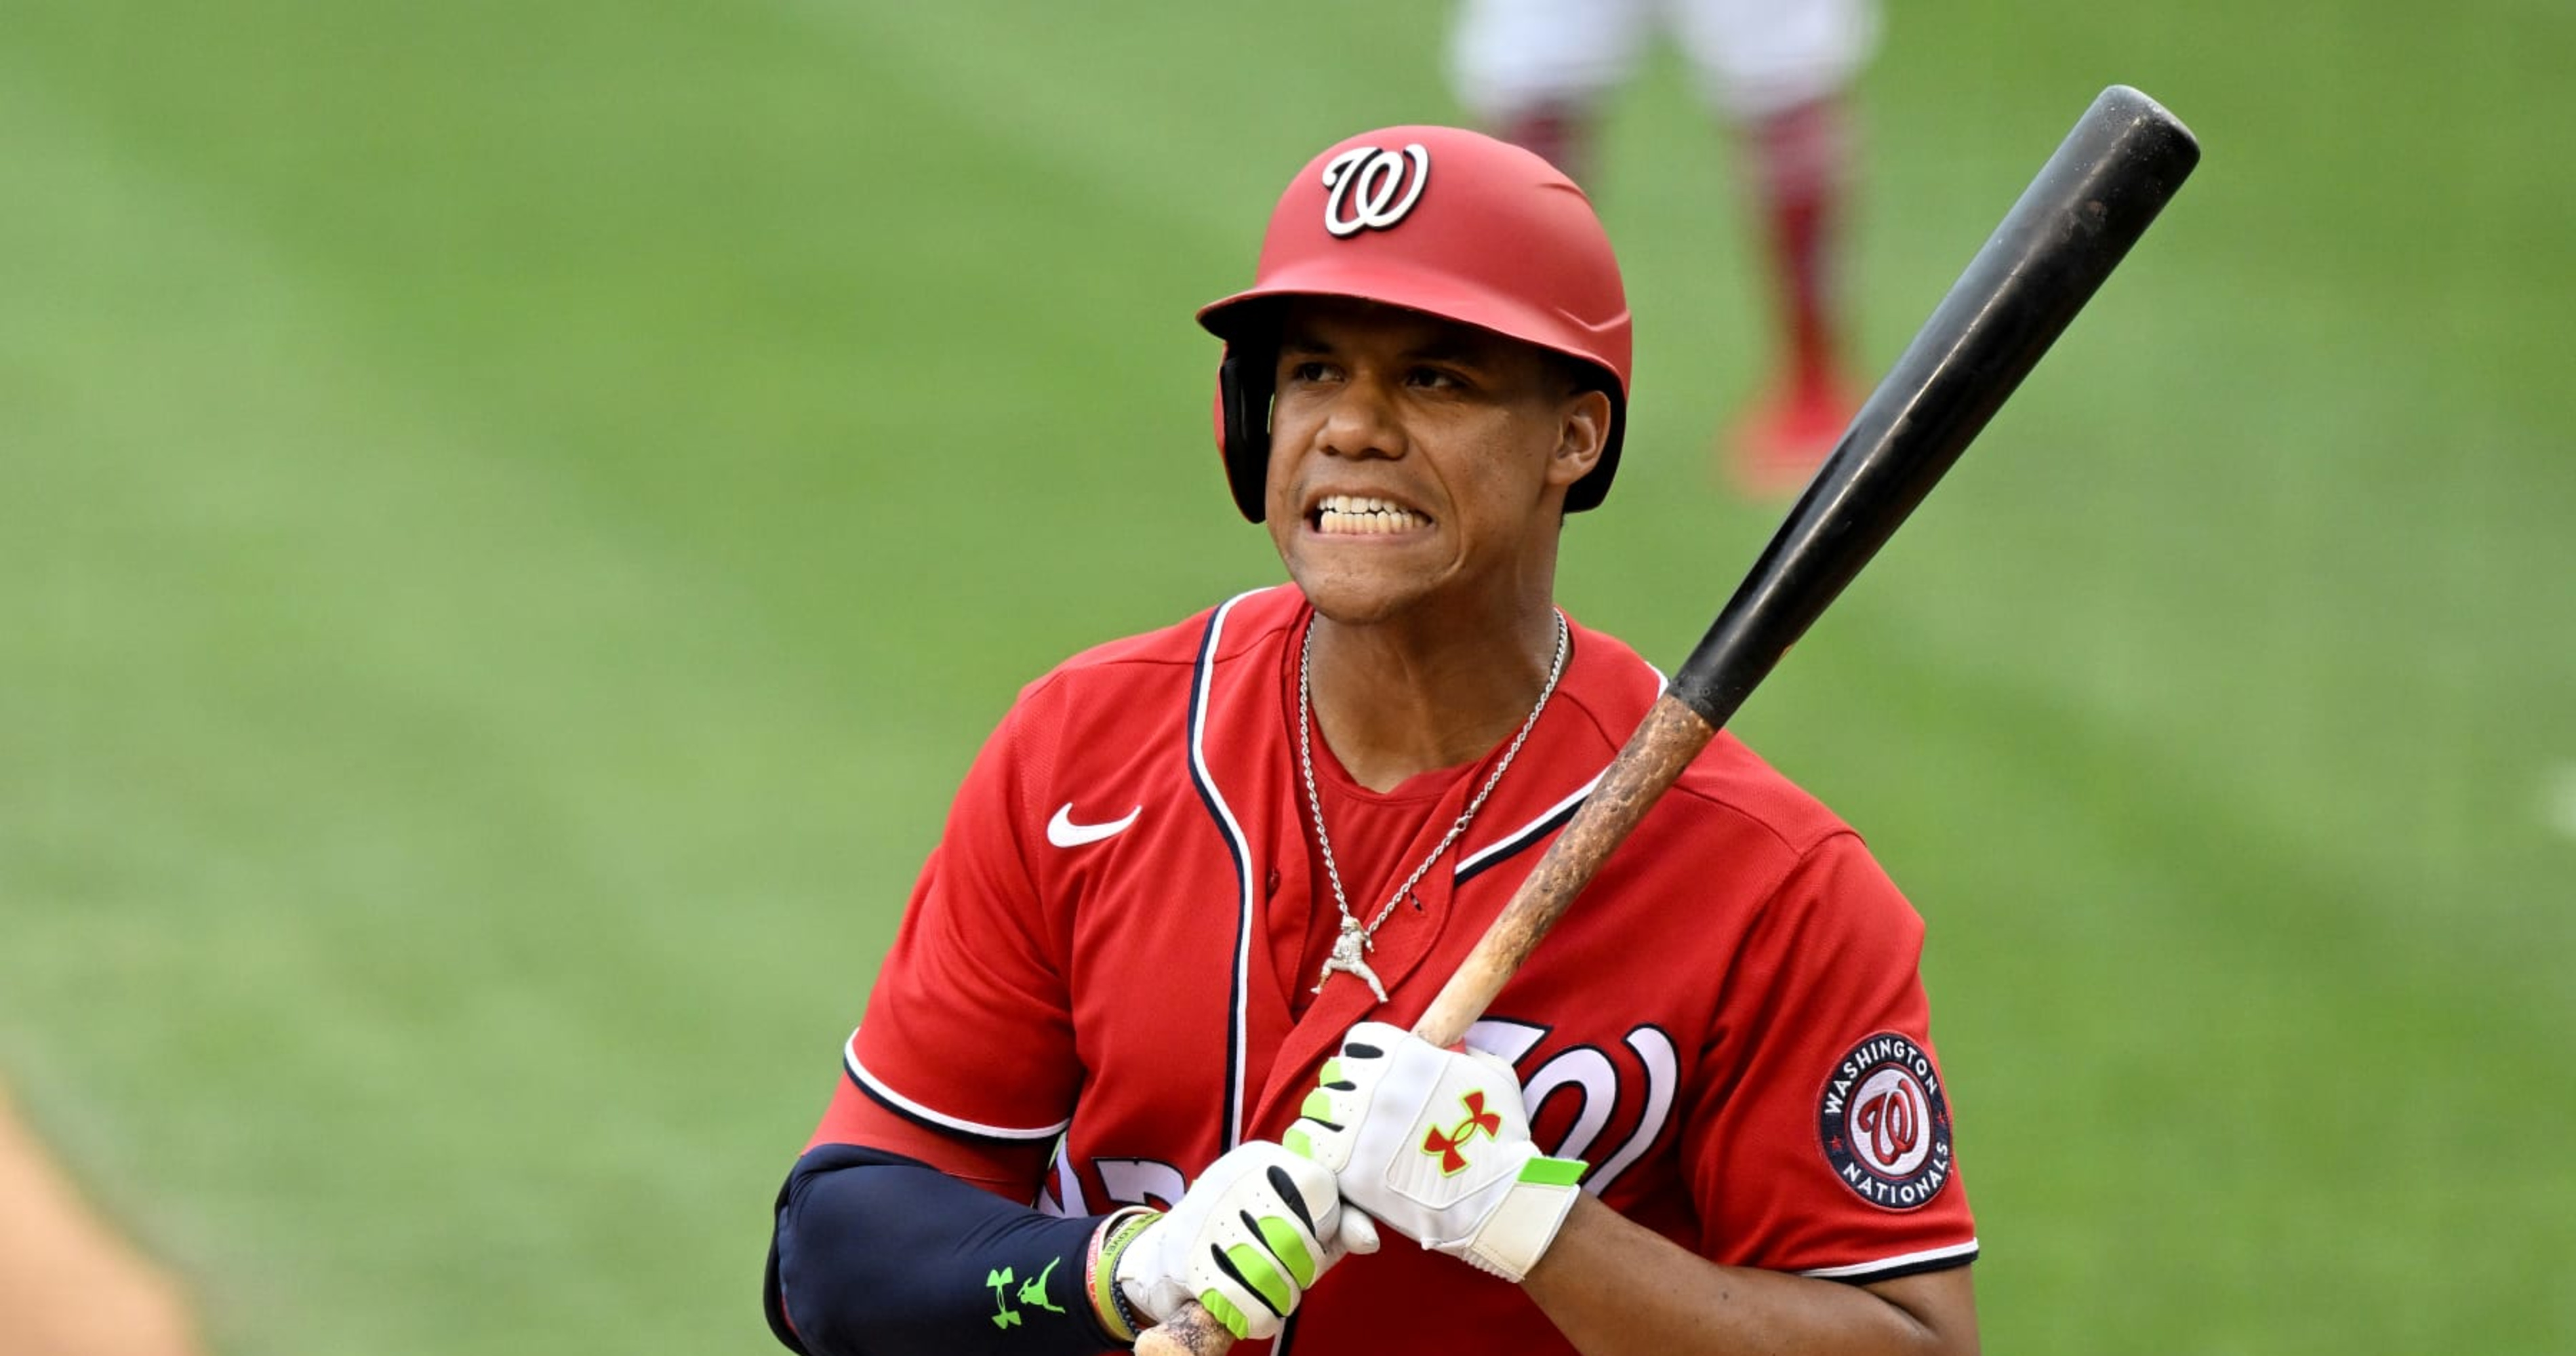 A year after trading Soto, the Nationals still need to be patient